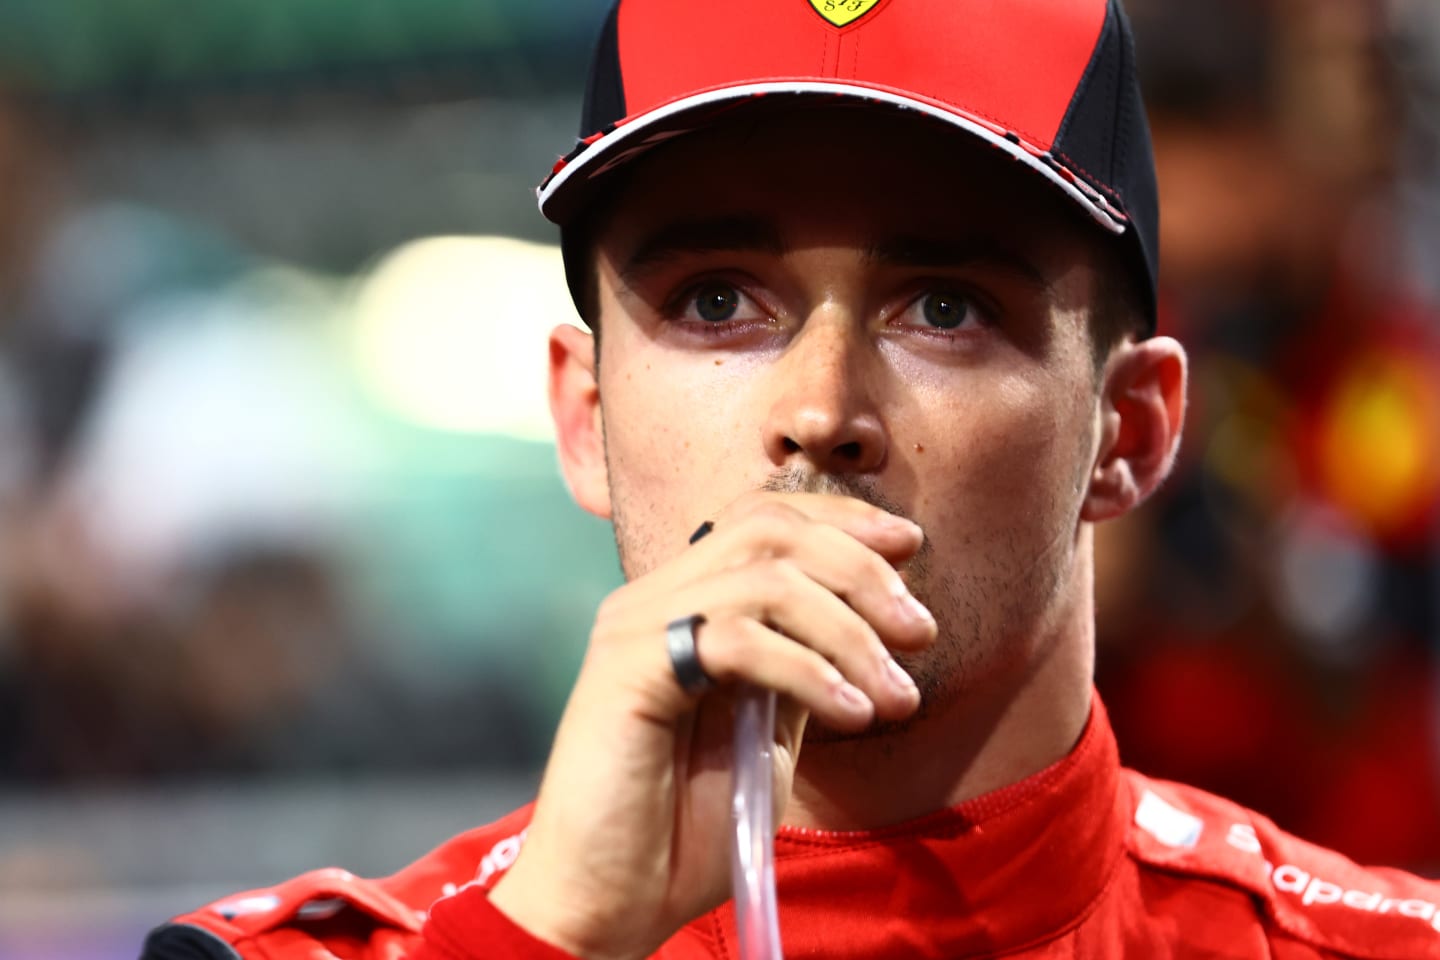 JEDDAH, SAUDI ARABIA - MARCH 26: Second placed qualifier Charles Leclerc of Monaco and Ferrari takes a drink in parc ferme during qualifying ahead of the F1 Grand Prix of Saudi Arabia at the Jeddah Corniche Circuit on March 26, 2022 in Jeddah, Saudi Arabia. (Photo by Mark Thompson/Getty Images)